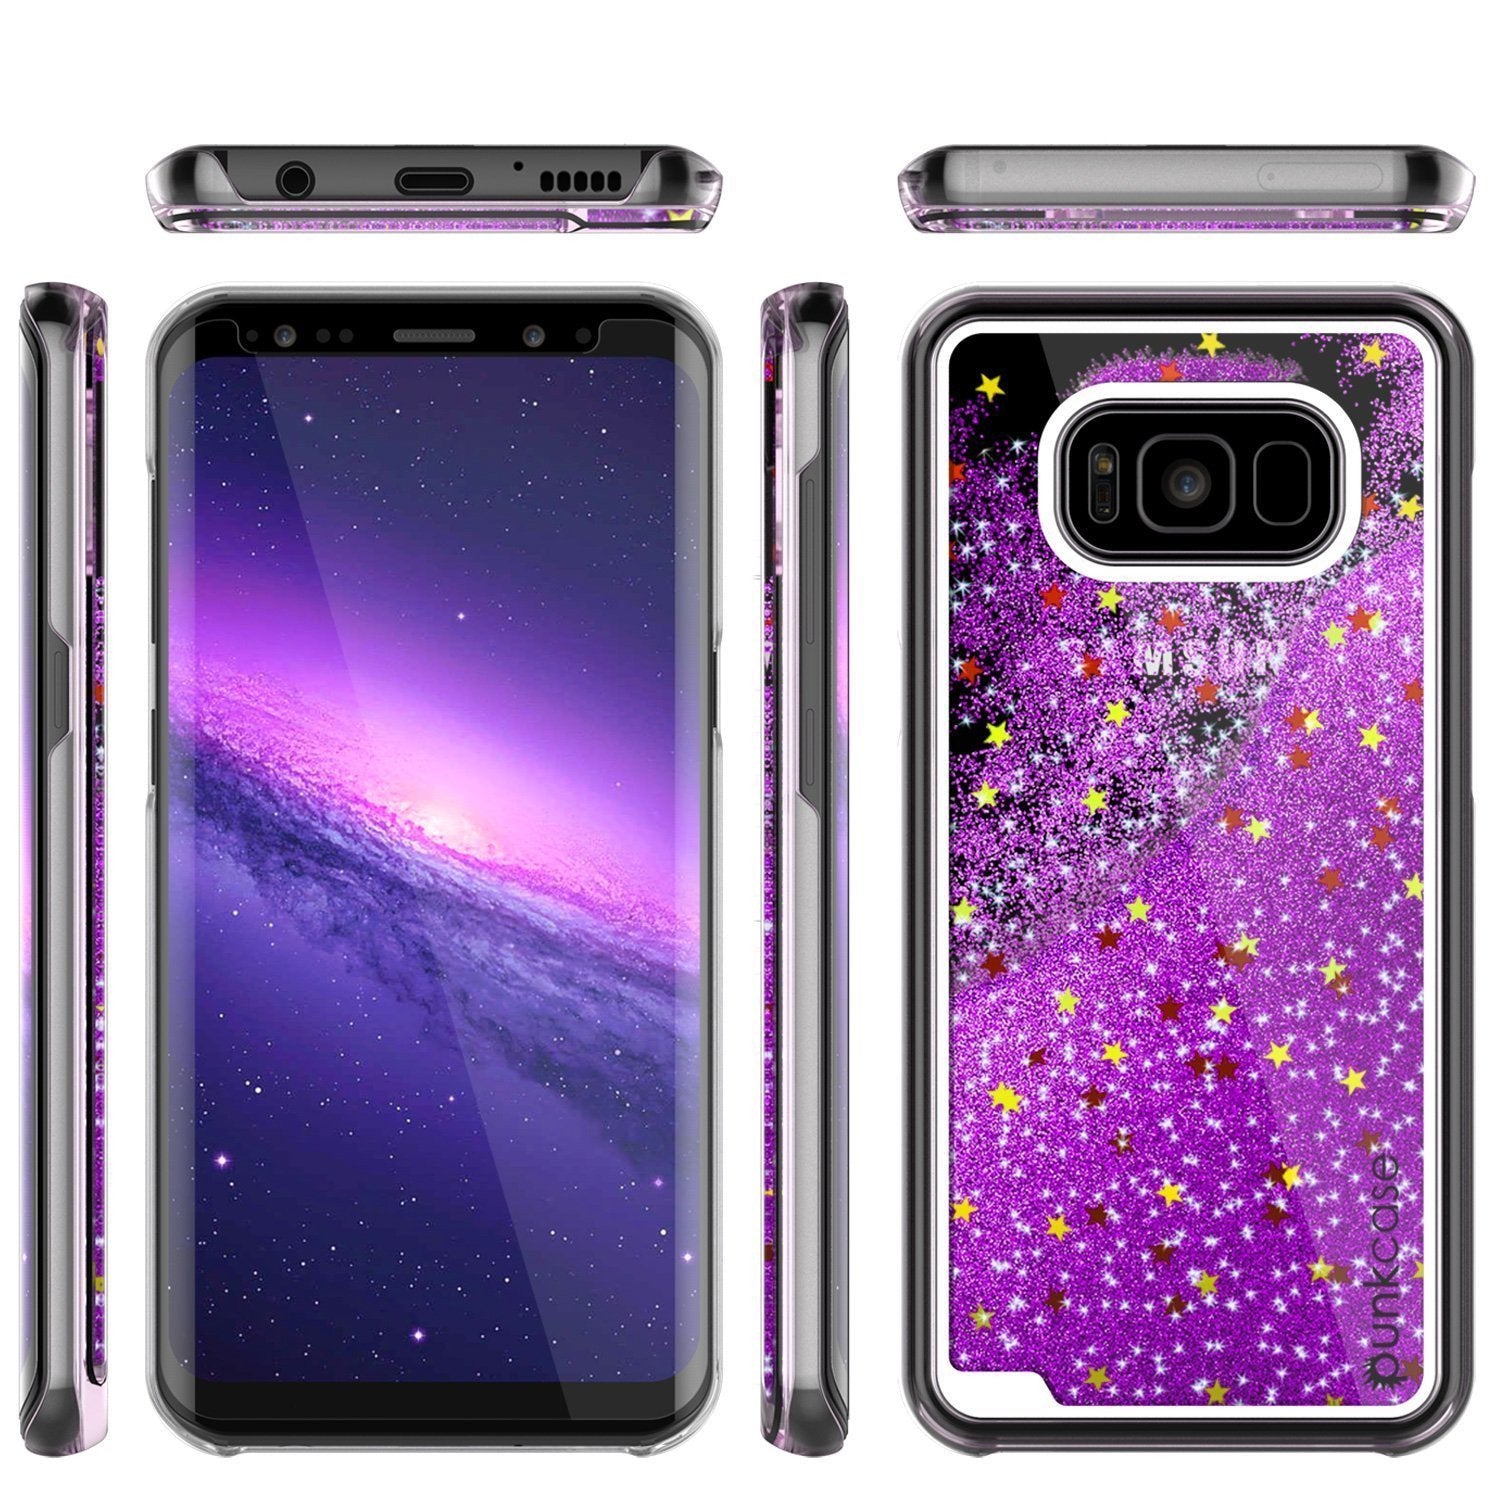 S8 Plus Case, Punkcase [Liquid Series] Protective Dual Layer Floating Glitter Cover with lots of Bling & Sparkle + PunkShield Screen Protector for Samsungs Galaxy S8+ [Purple] - PunkCase NZ